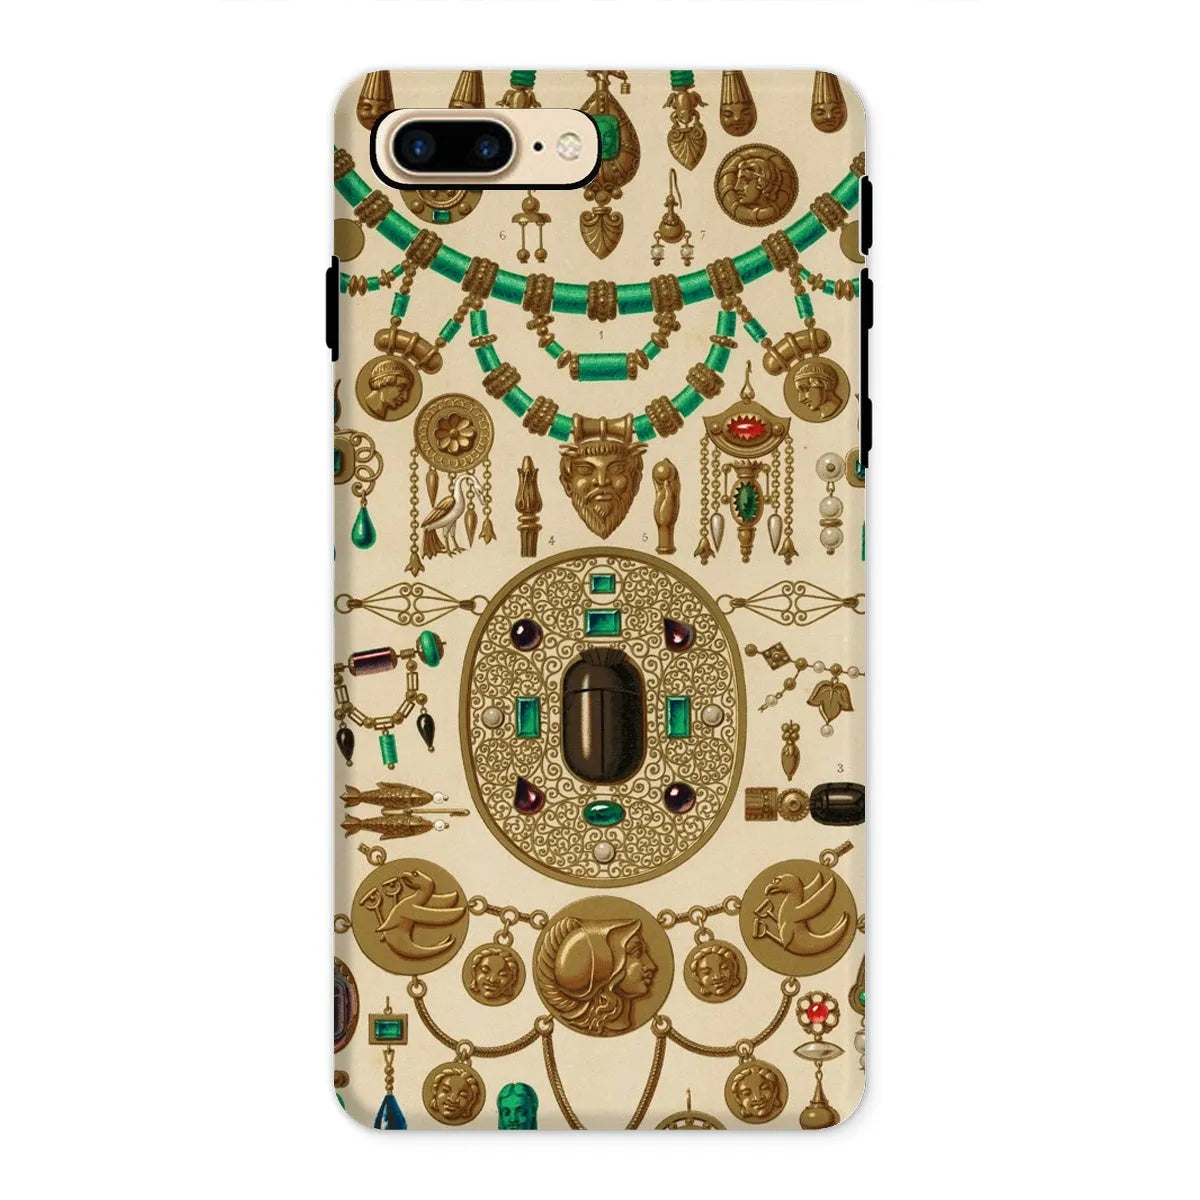 Etruscan Jewelry By Auguste Racinet Art Phone Case - Iphone 8 Plus / Matte - Mobile Phone Cases - Aesthetic Art